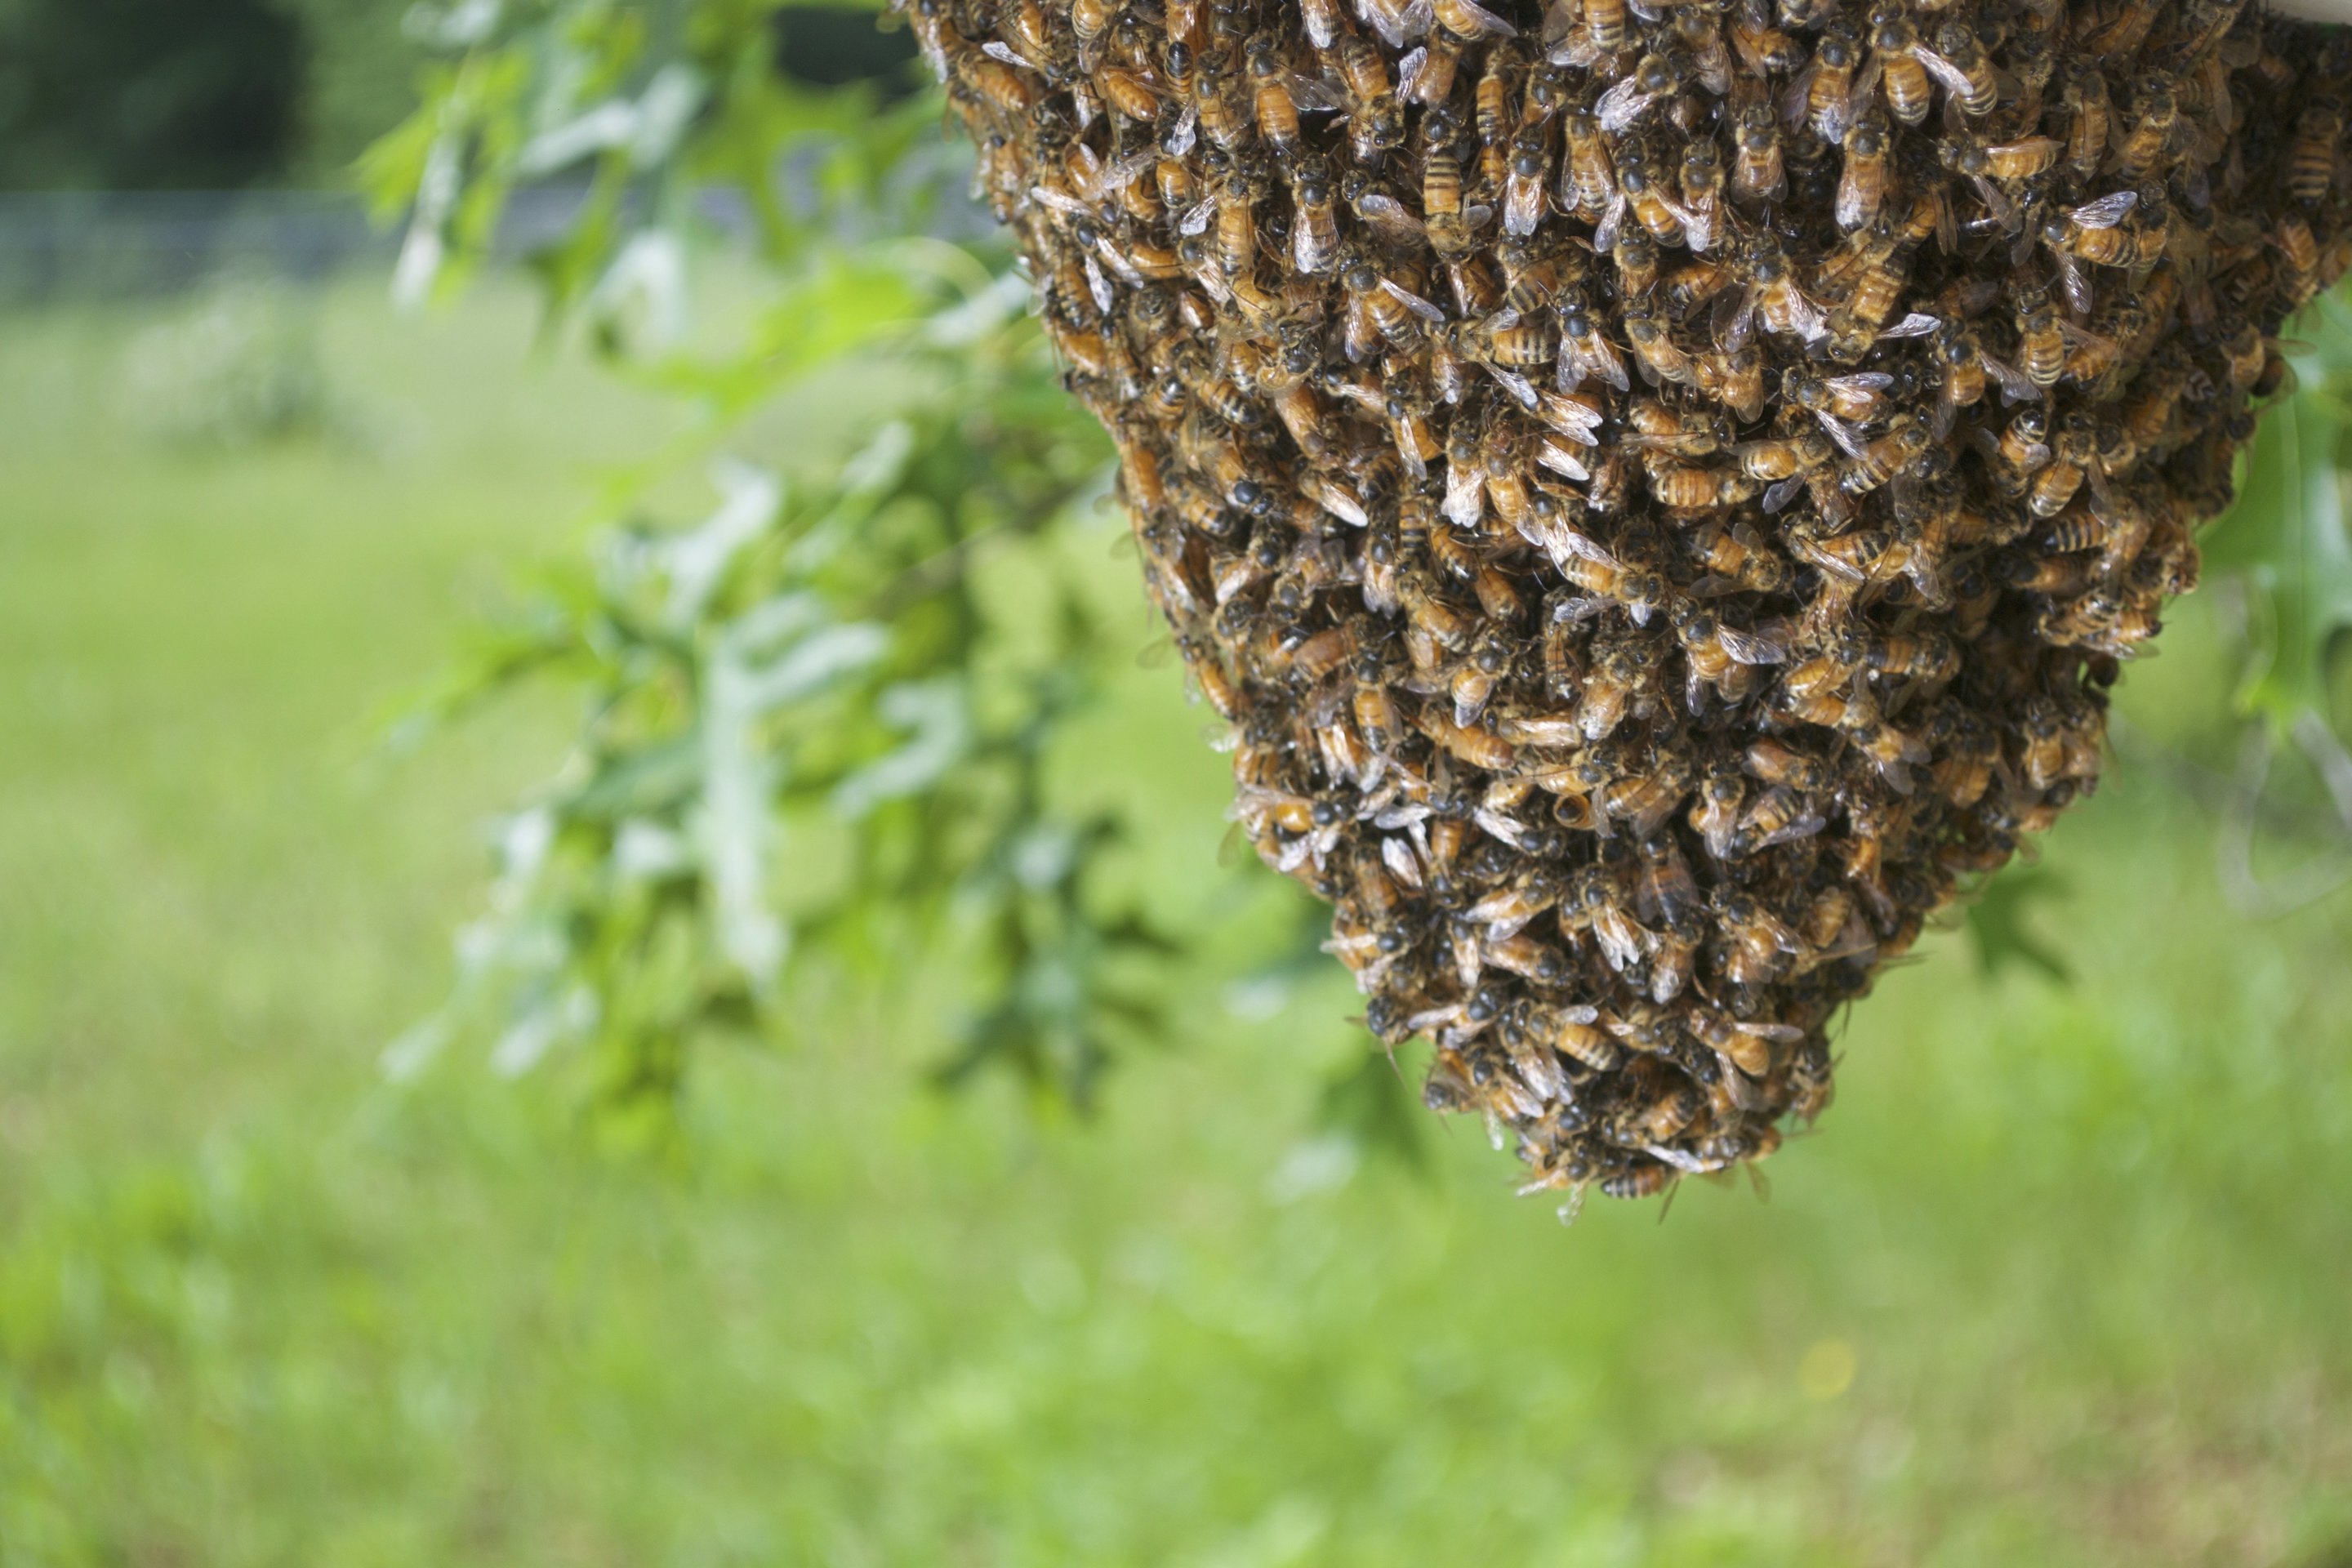 Shaking the swarm—researchers explore how bees collaborate to stabilize  swarm clusters